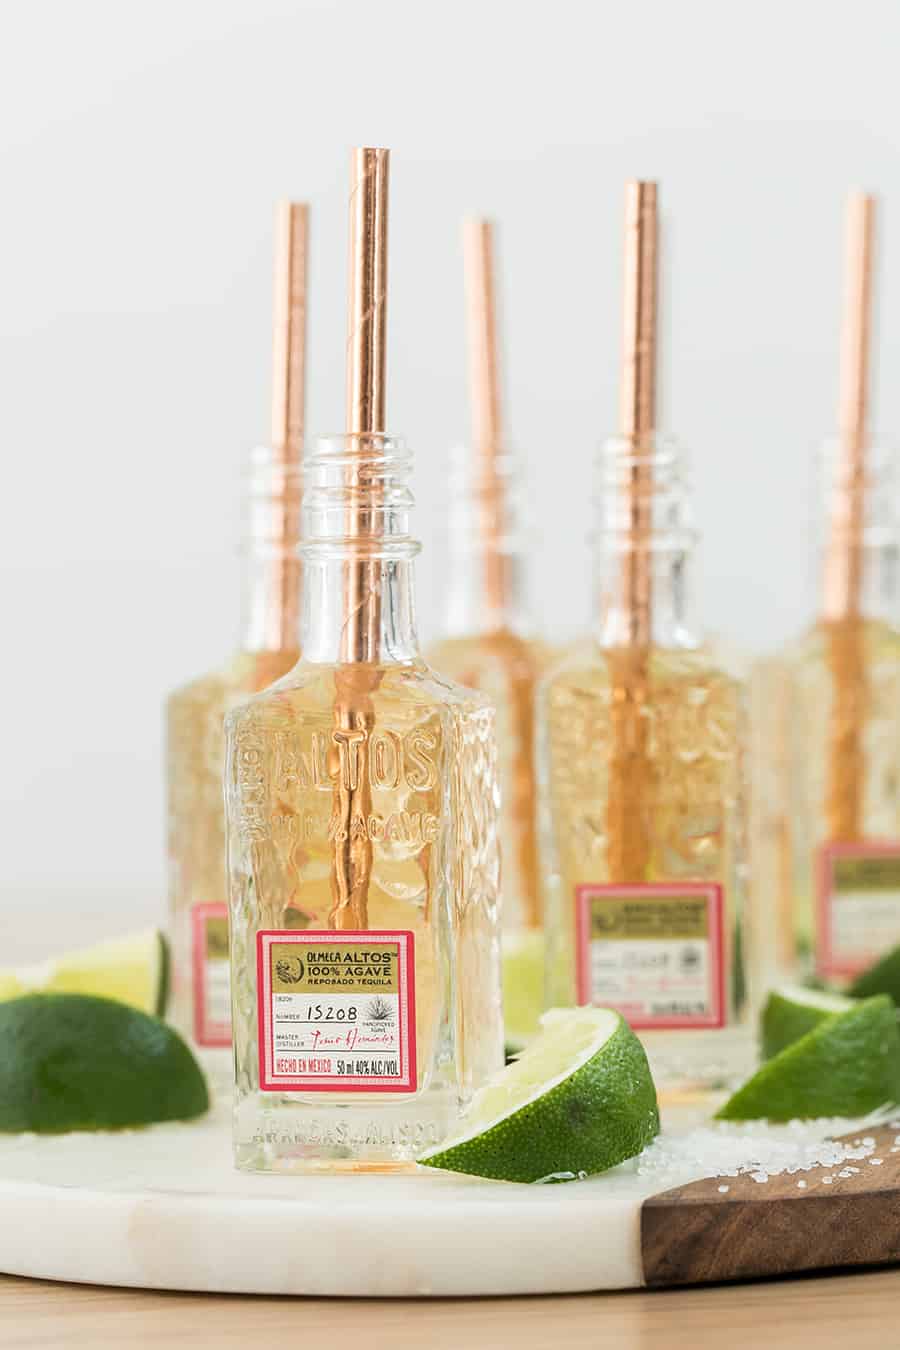 Tiny tequila shots in mini tequila bottles with a copper straw and a lime wedge. - alcoholic beverages, drink margarita, natural flavors, alcoholic beverages, jose cuervo margarita minis